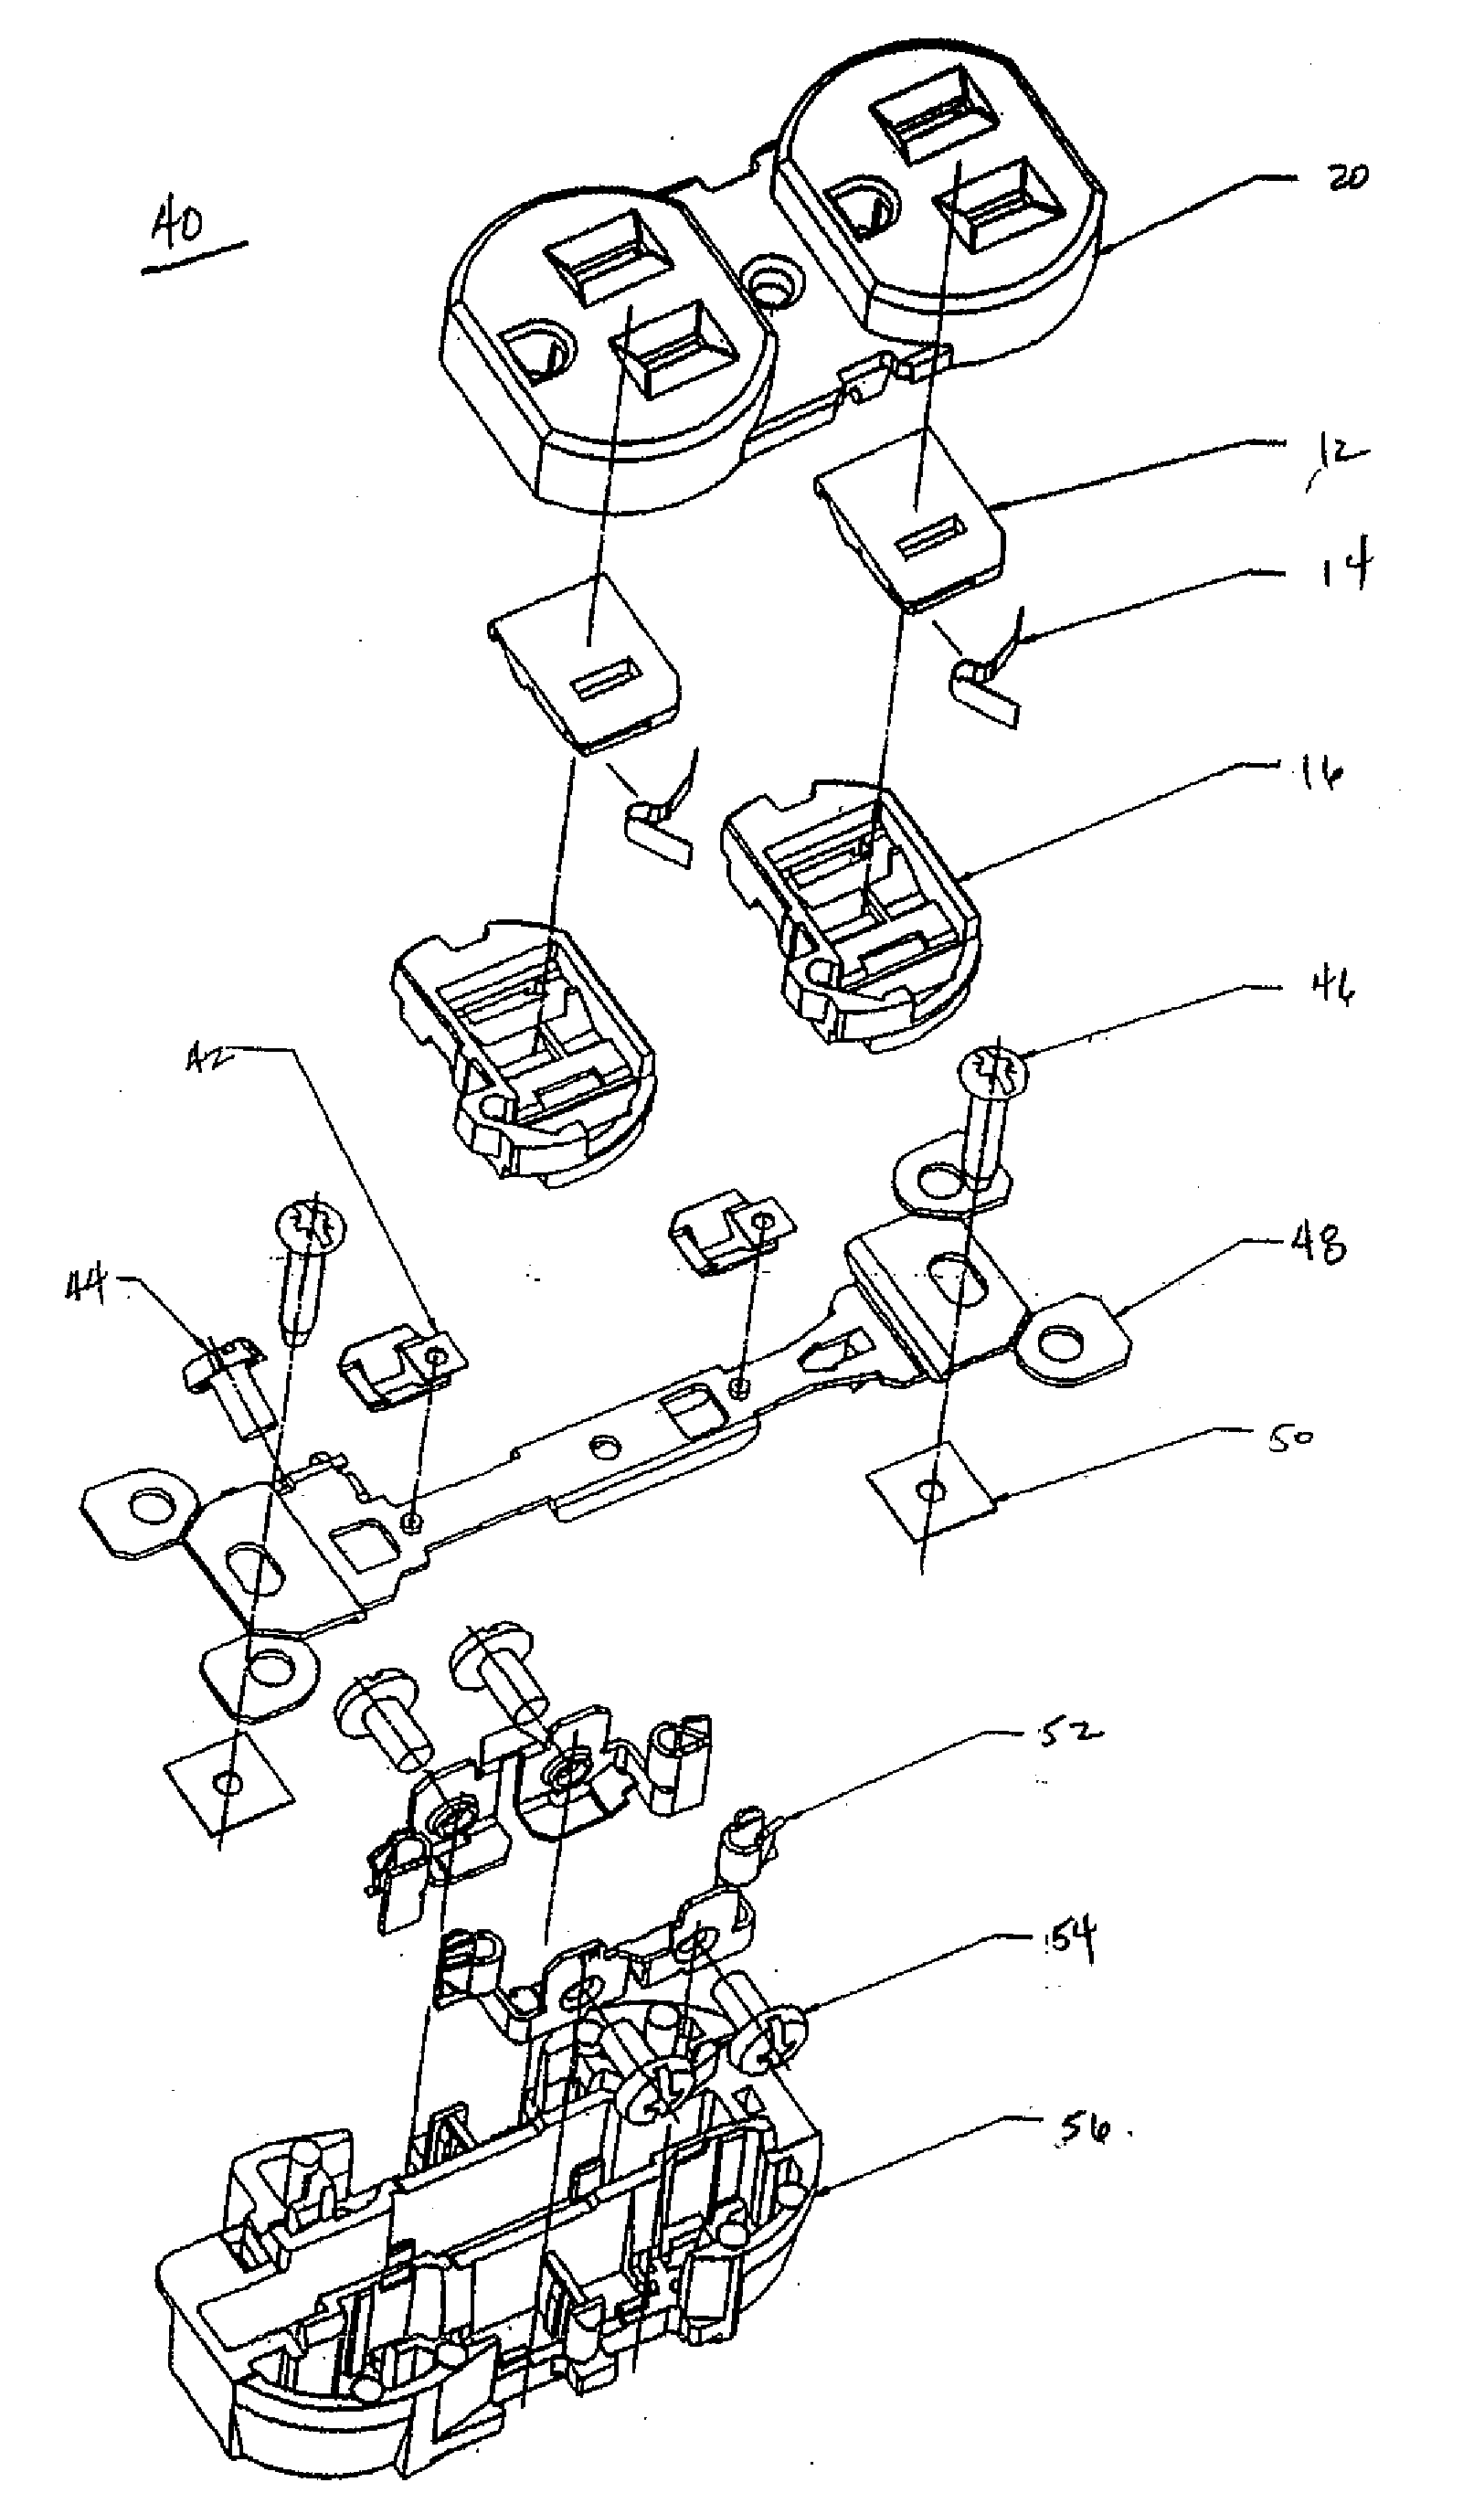 Tamper-resistant electrical wiring device system